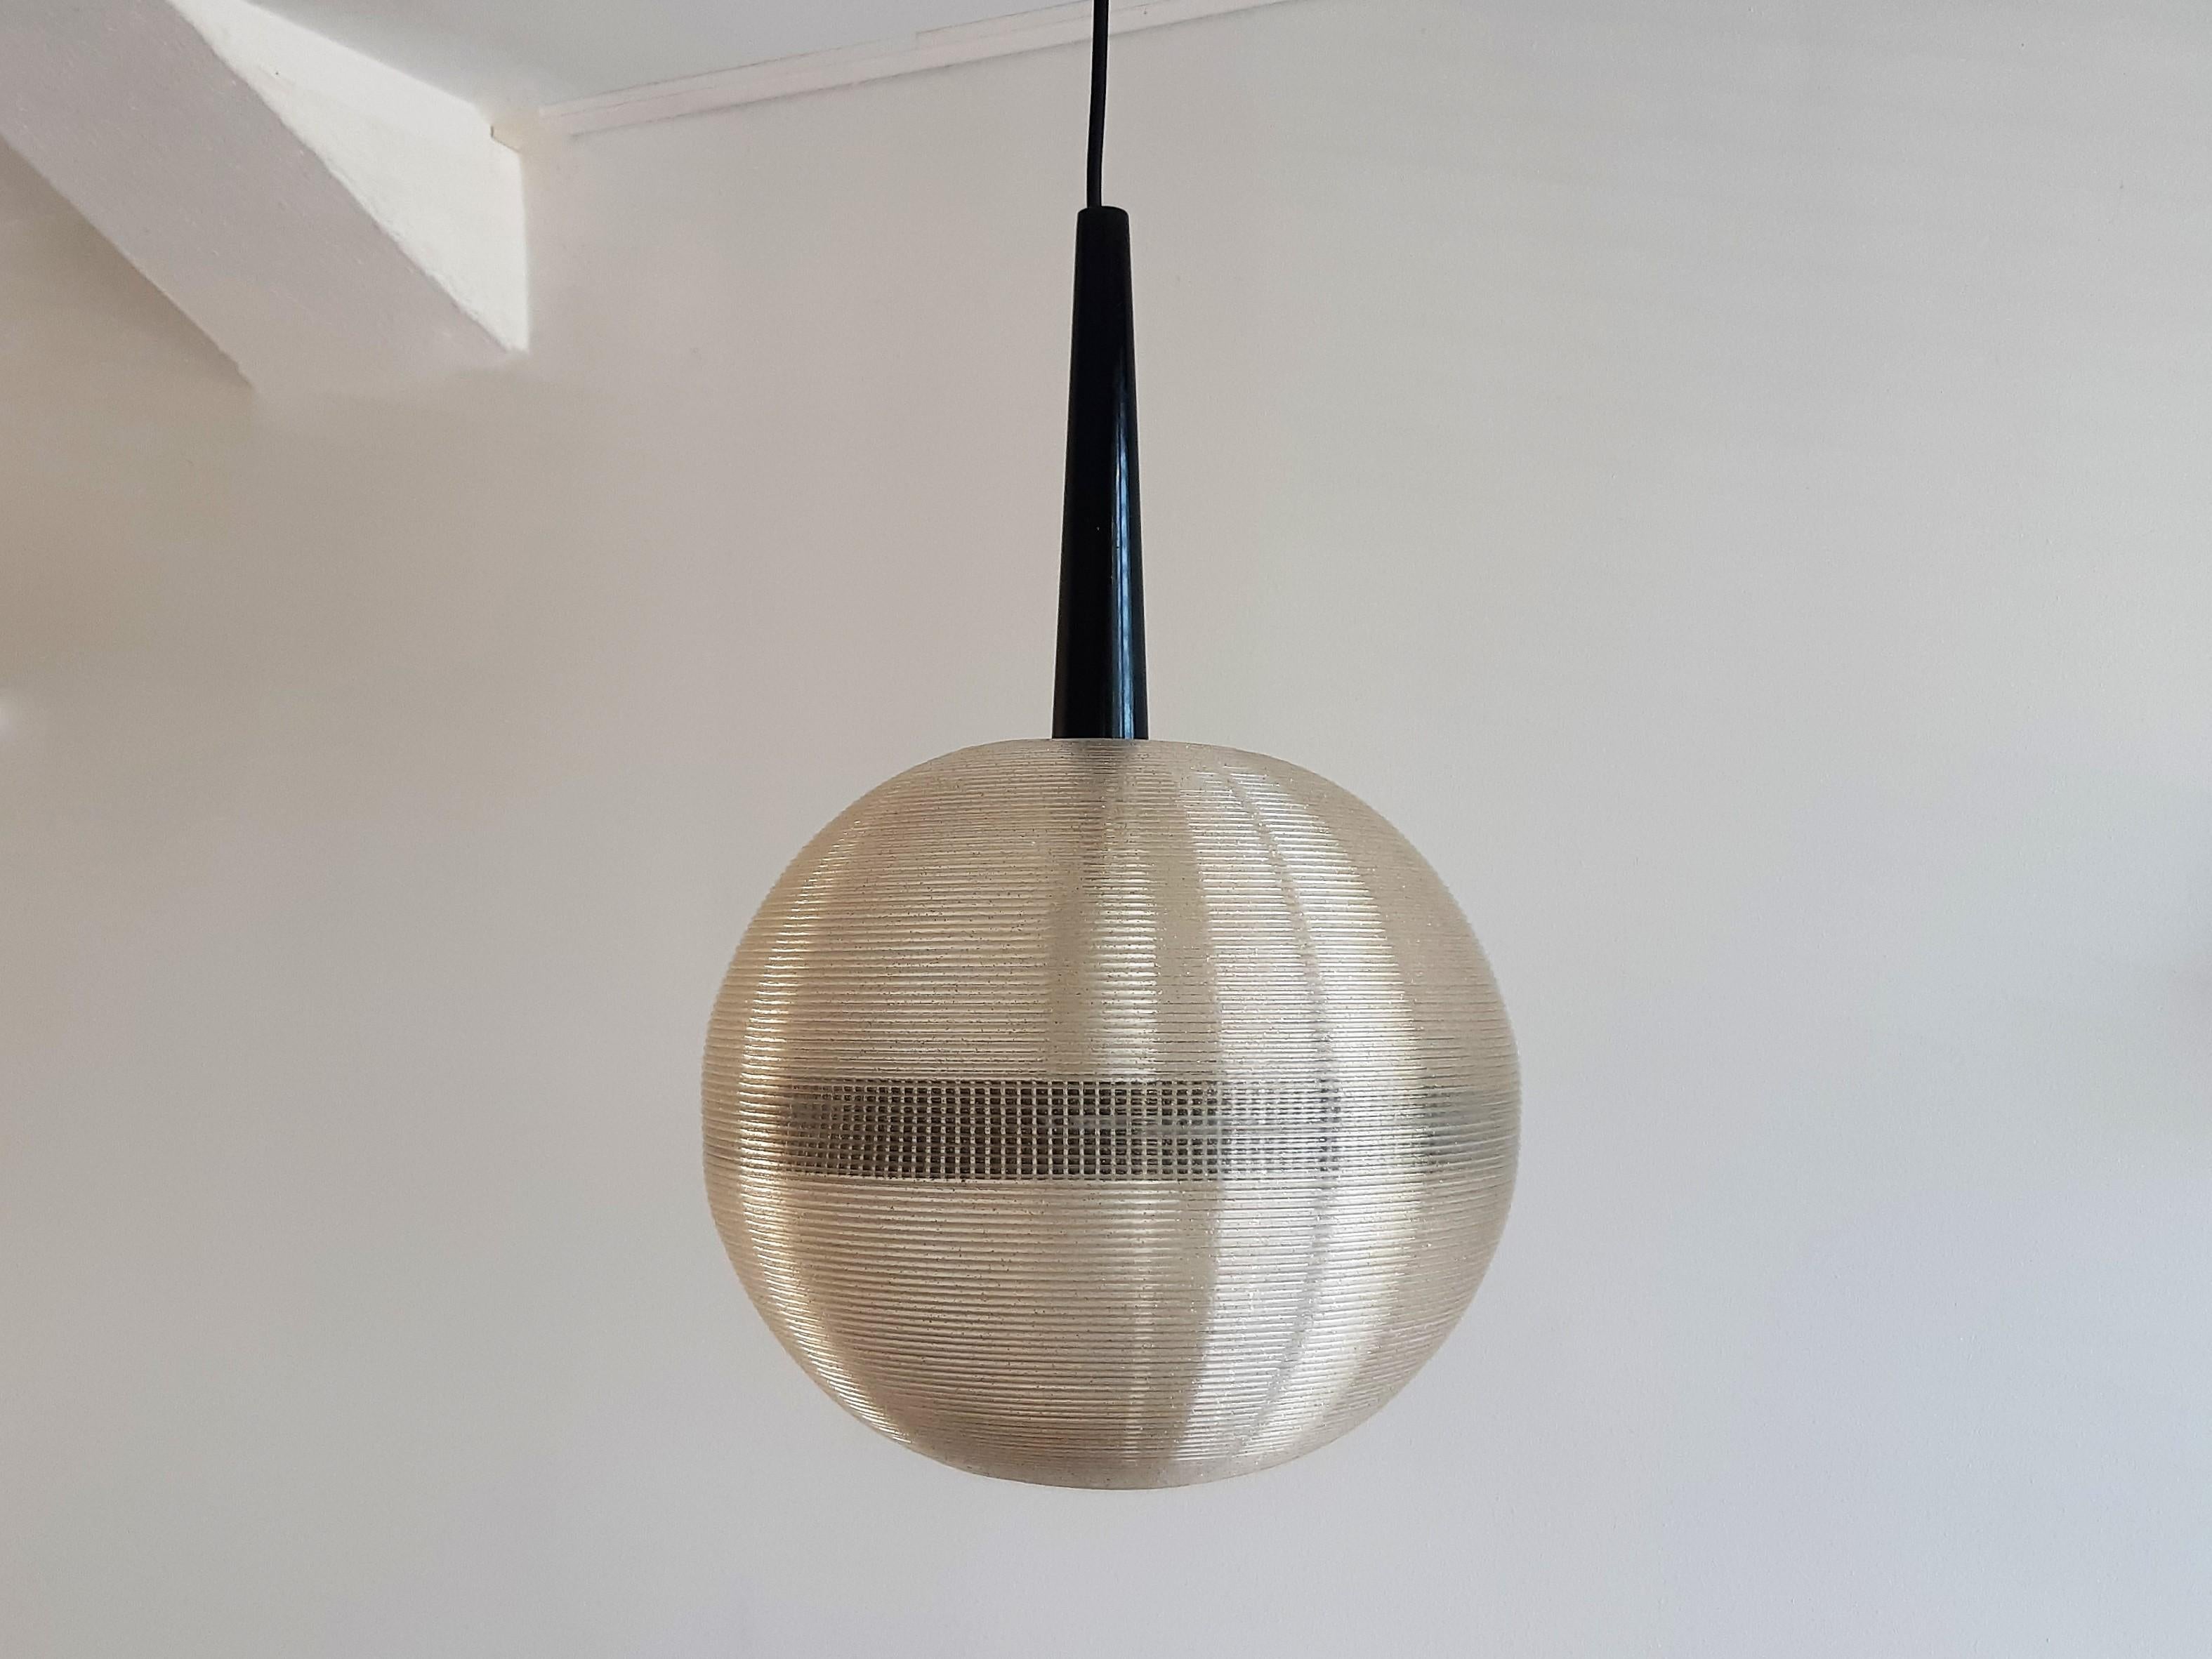 This rare pendant lamp was designed by John Reed for Rotaflex, in the 1950's/1960's. A very beautiful design because of the simplicity. The shade is made out of Cellulose Acetate (plastics) with a black wooden top. The use of material spreads and